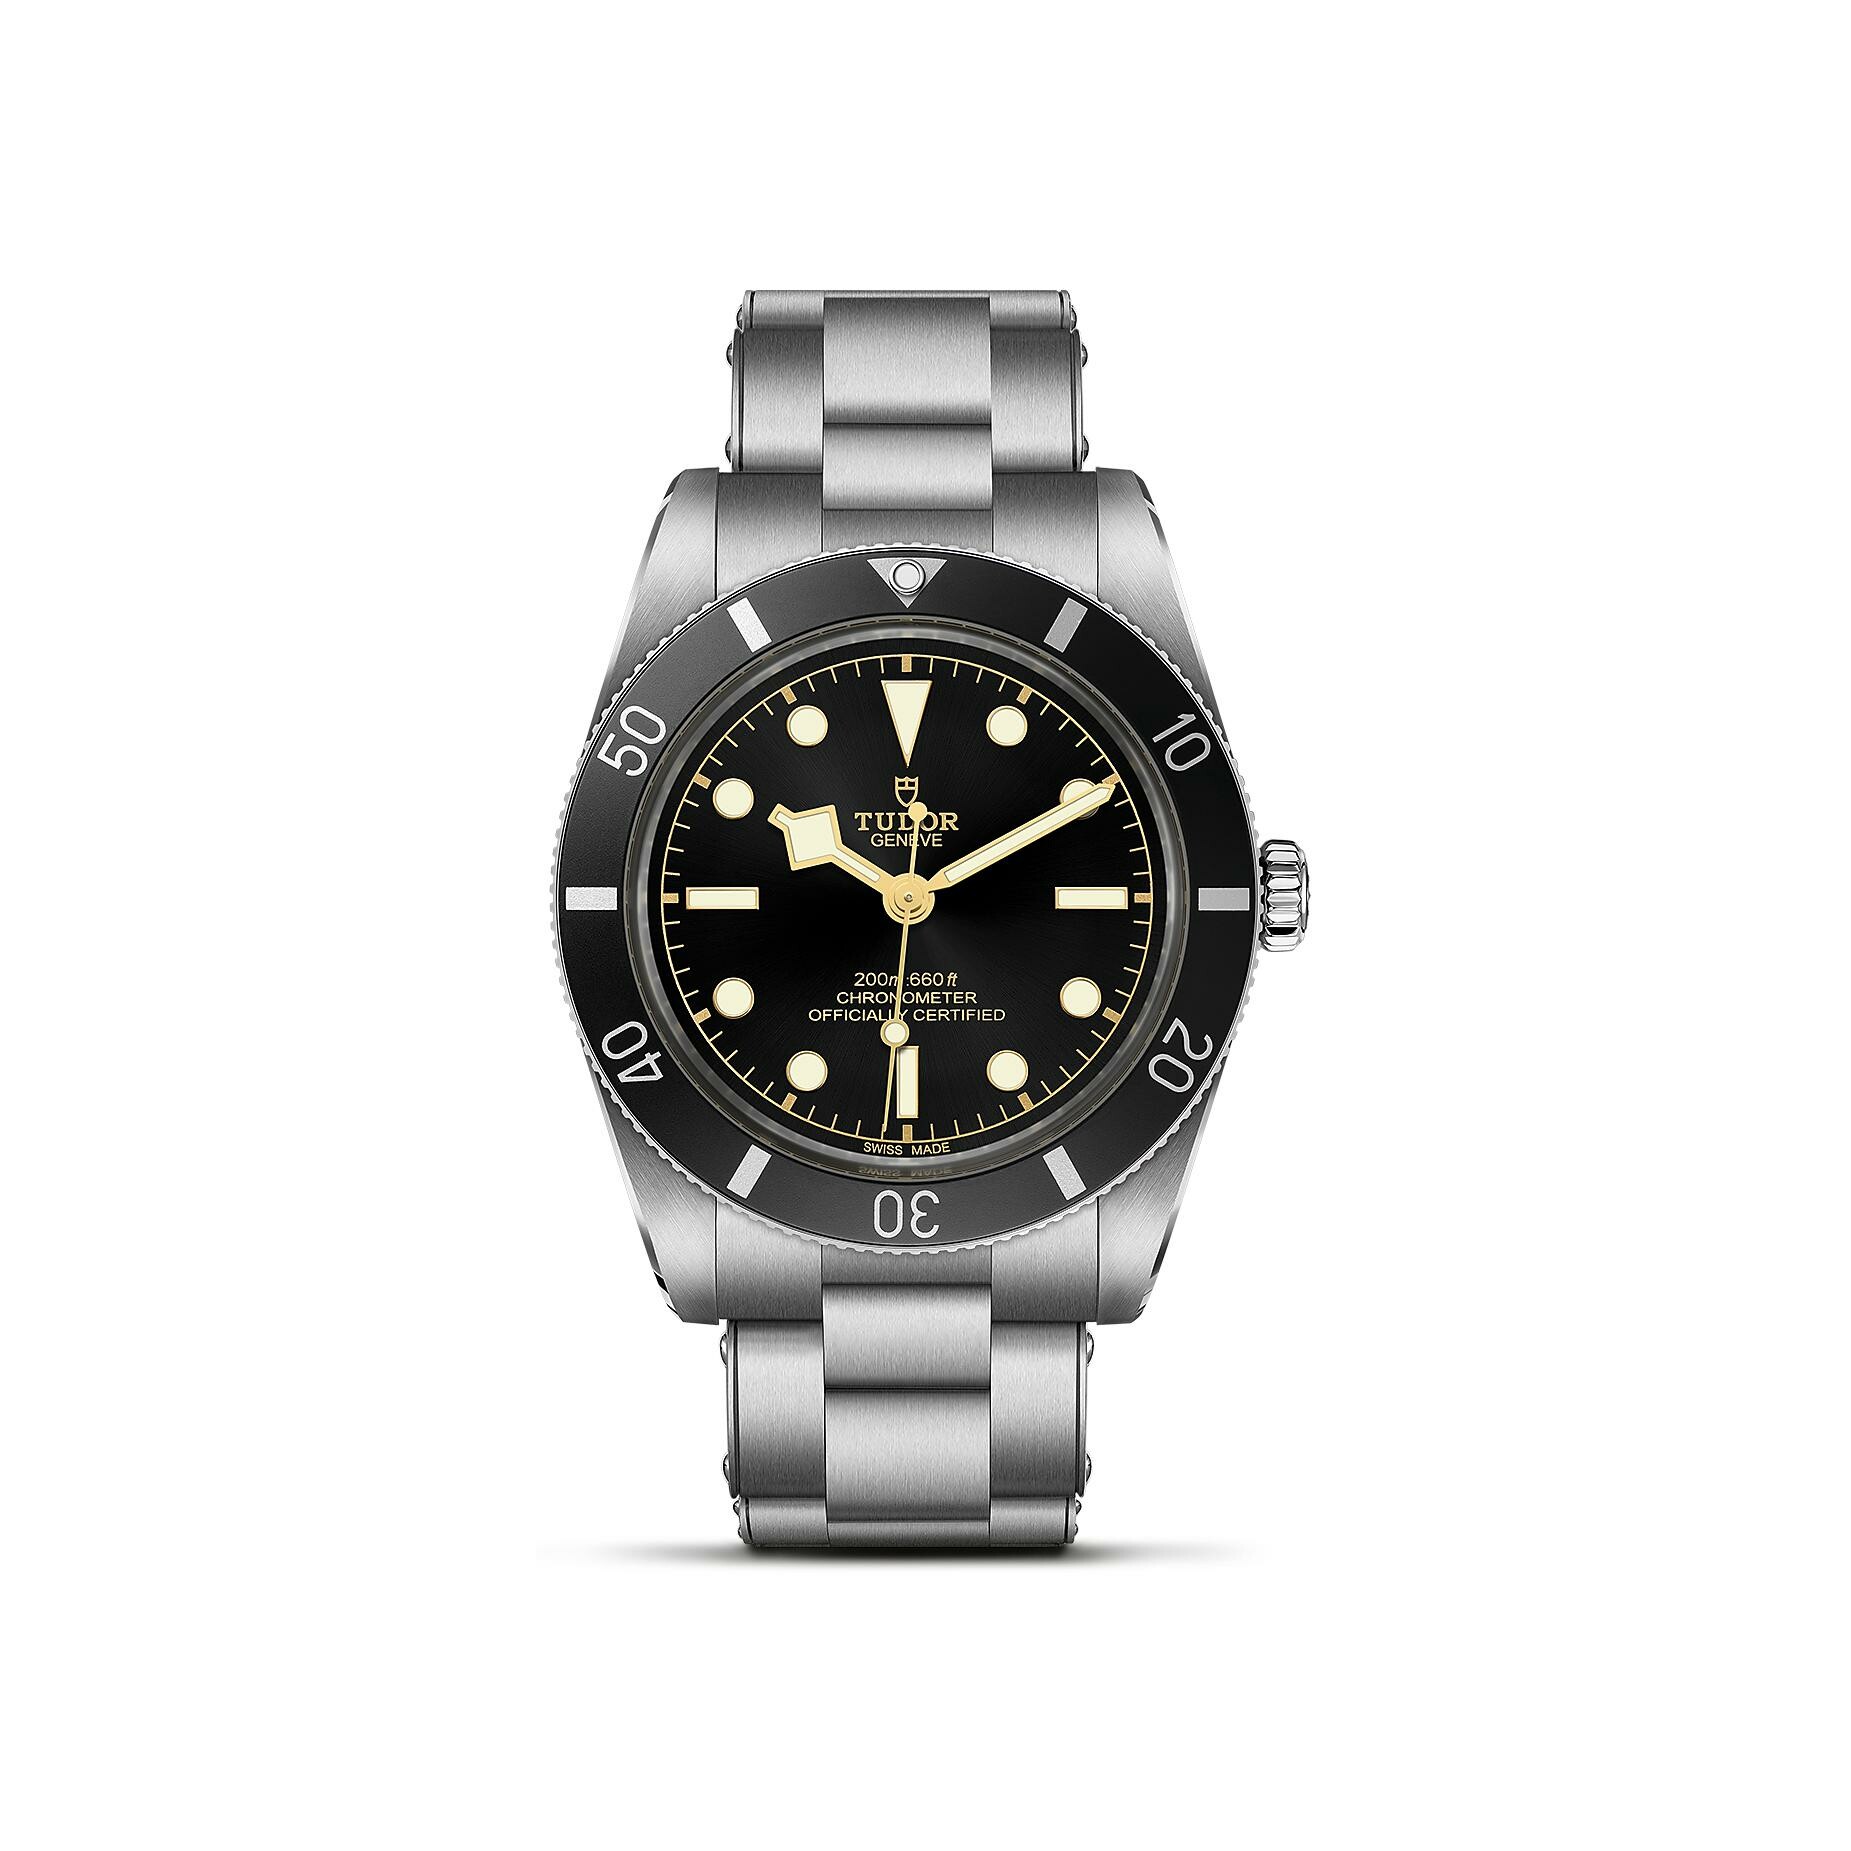 Tudor Watch - The TUDOR Black Bay line is the result of a subtle blend of  traditional aesthetics and contemporary watchmaking. #TudorWatch  #BornToDare #BlackBayS&G Discover the watch: www.tudorwatch.com/watches/black-bay-32-36-41/m79503-0002  | Facebook